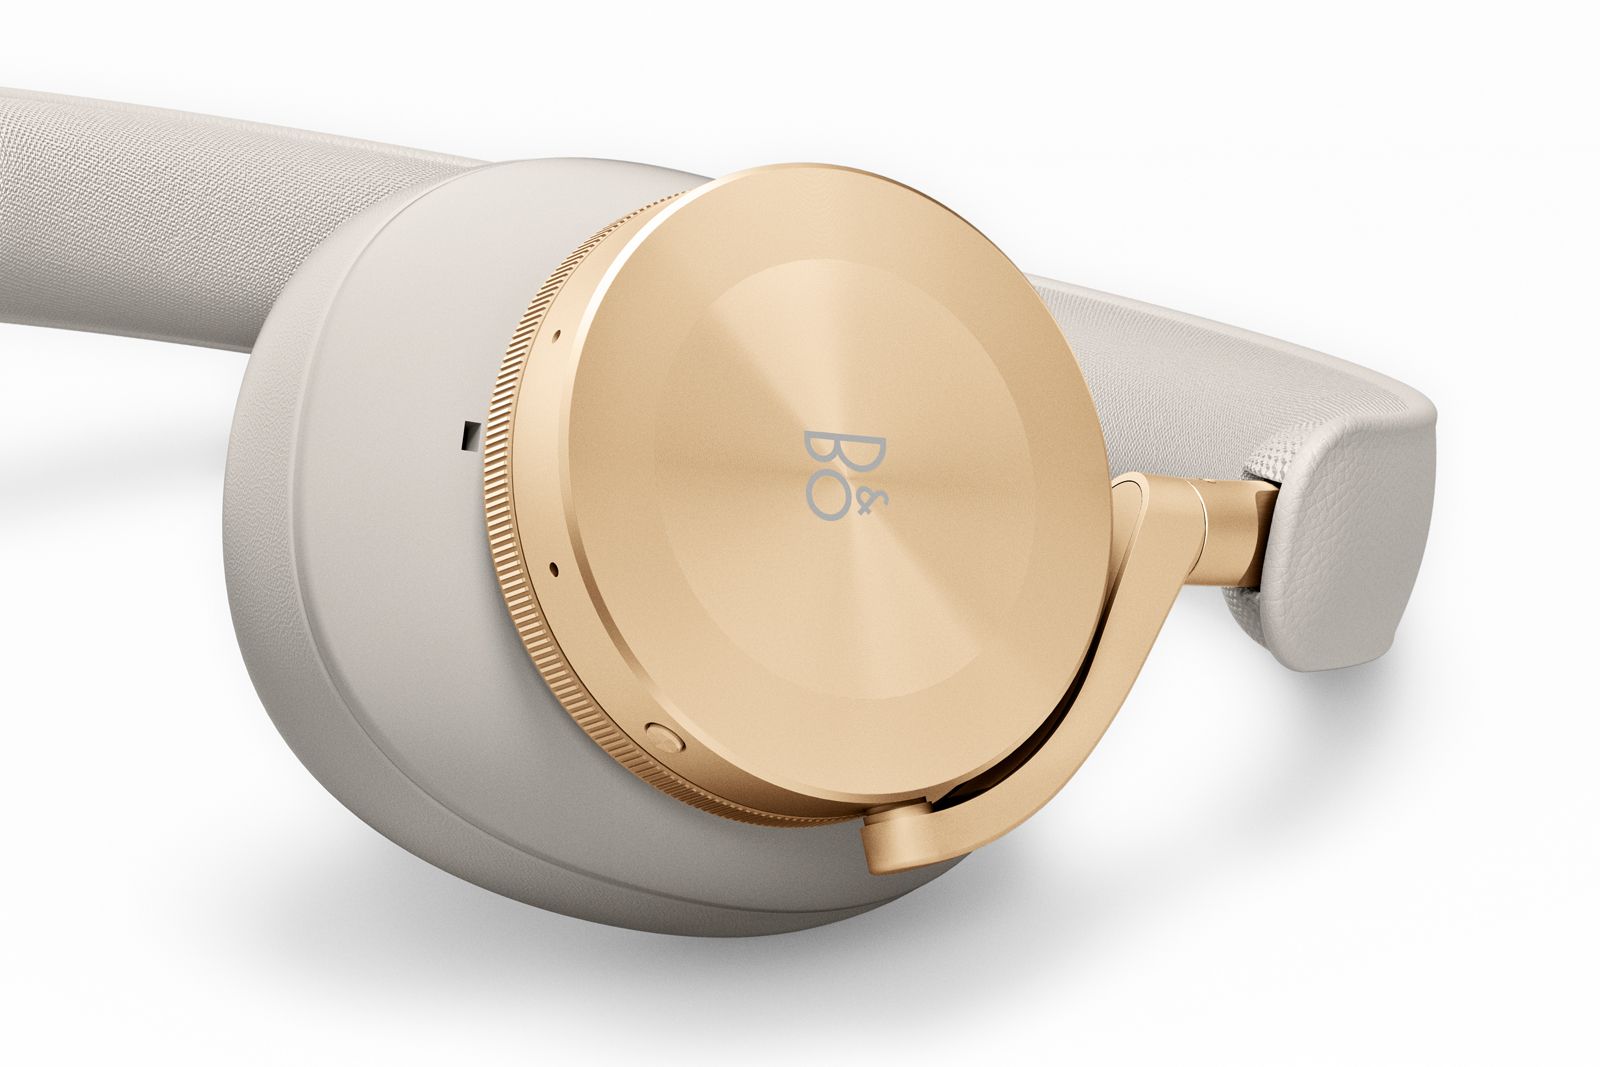 Bang & Olufsen's Golden Collection casts its existing gear in a new light photo 1